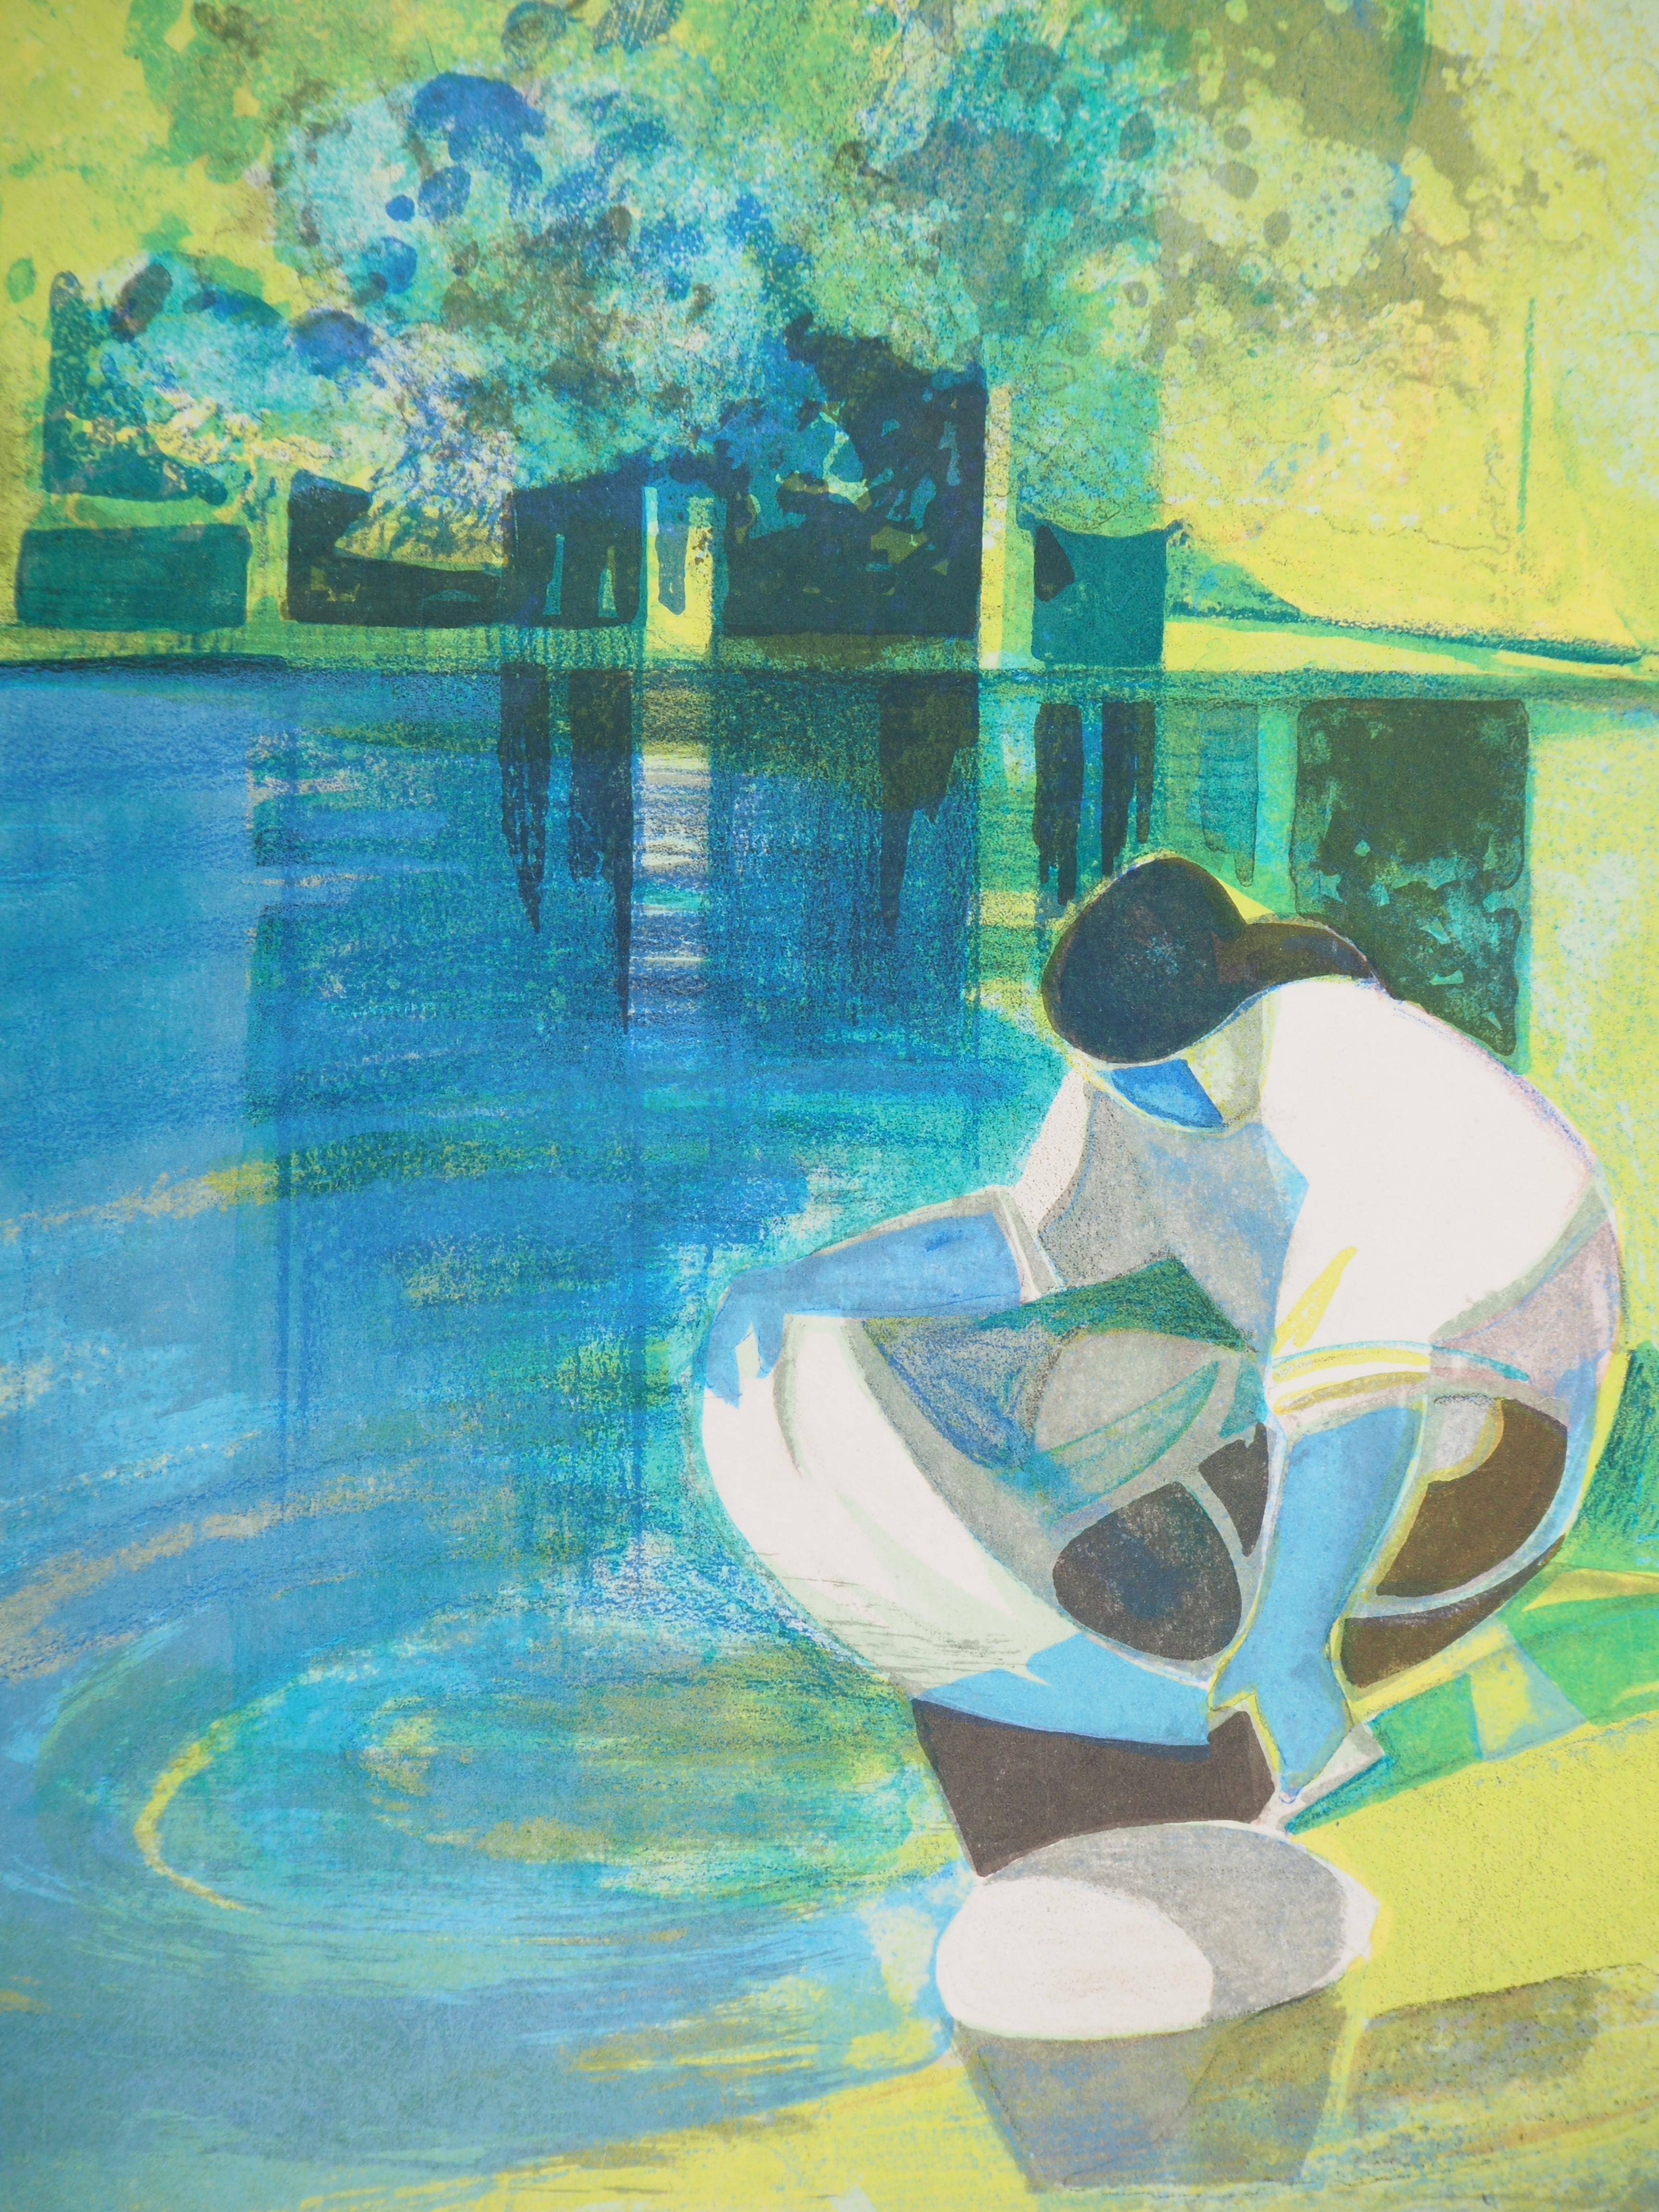 Rivers in France : The Washerwoman - Original handsigned lithograph - Modern Print by Camille Hilaire